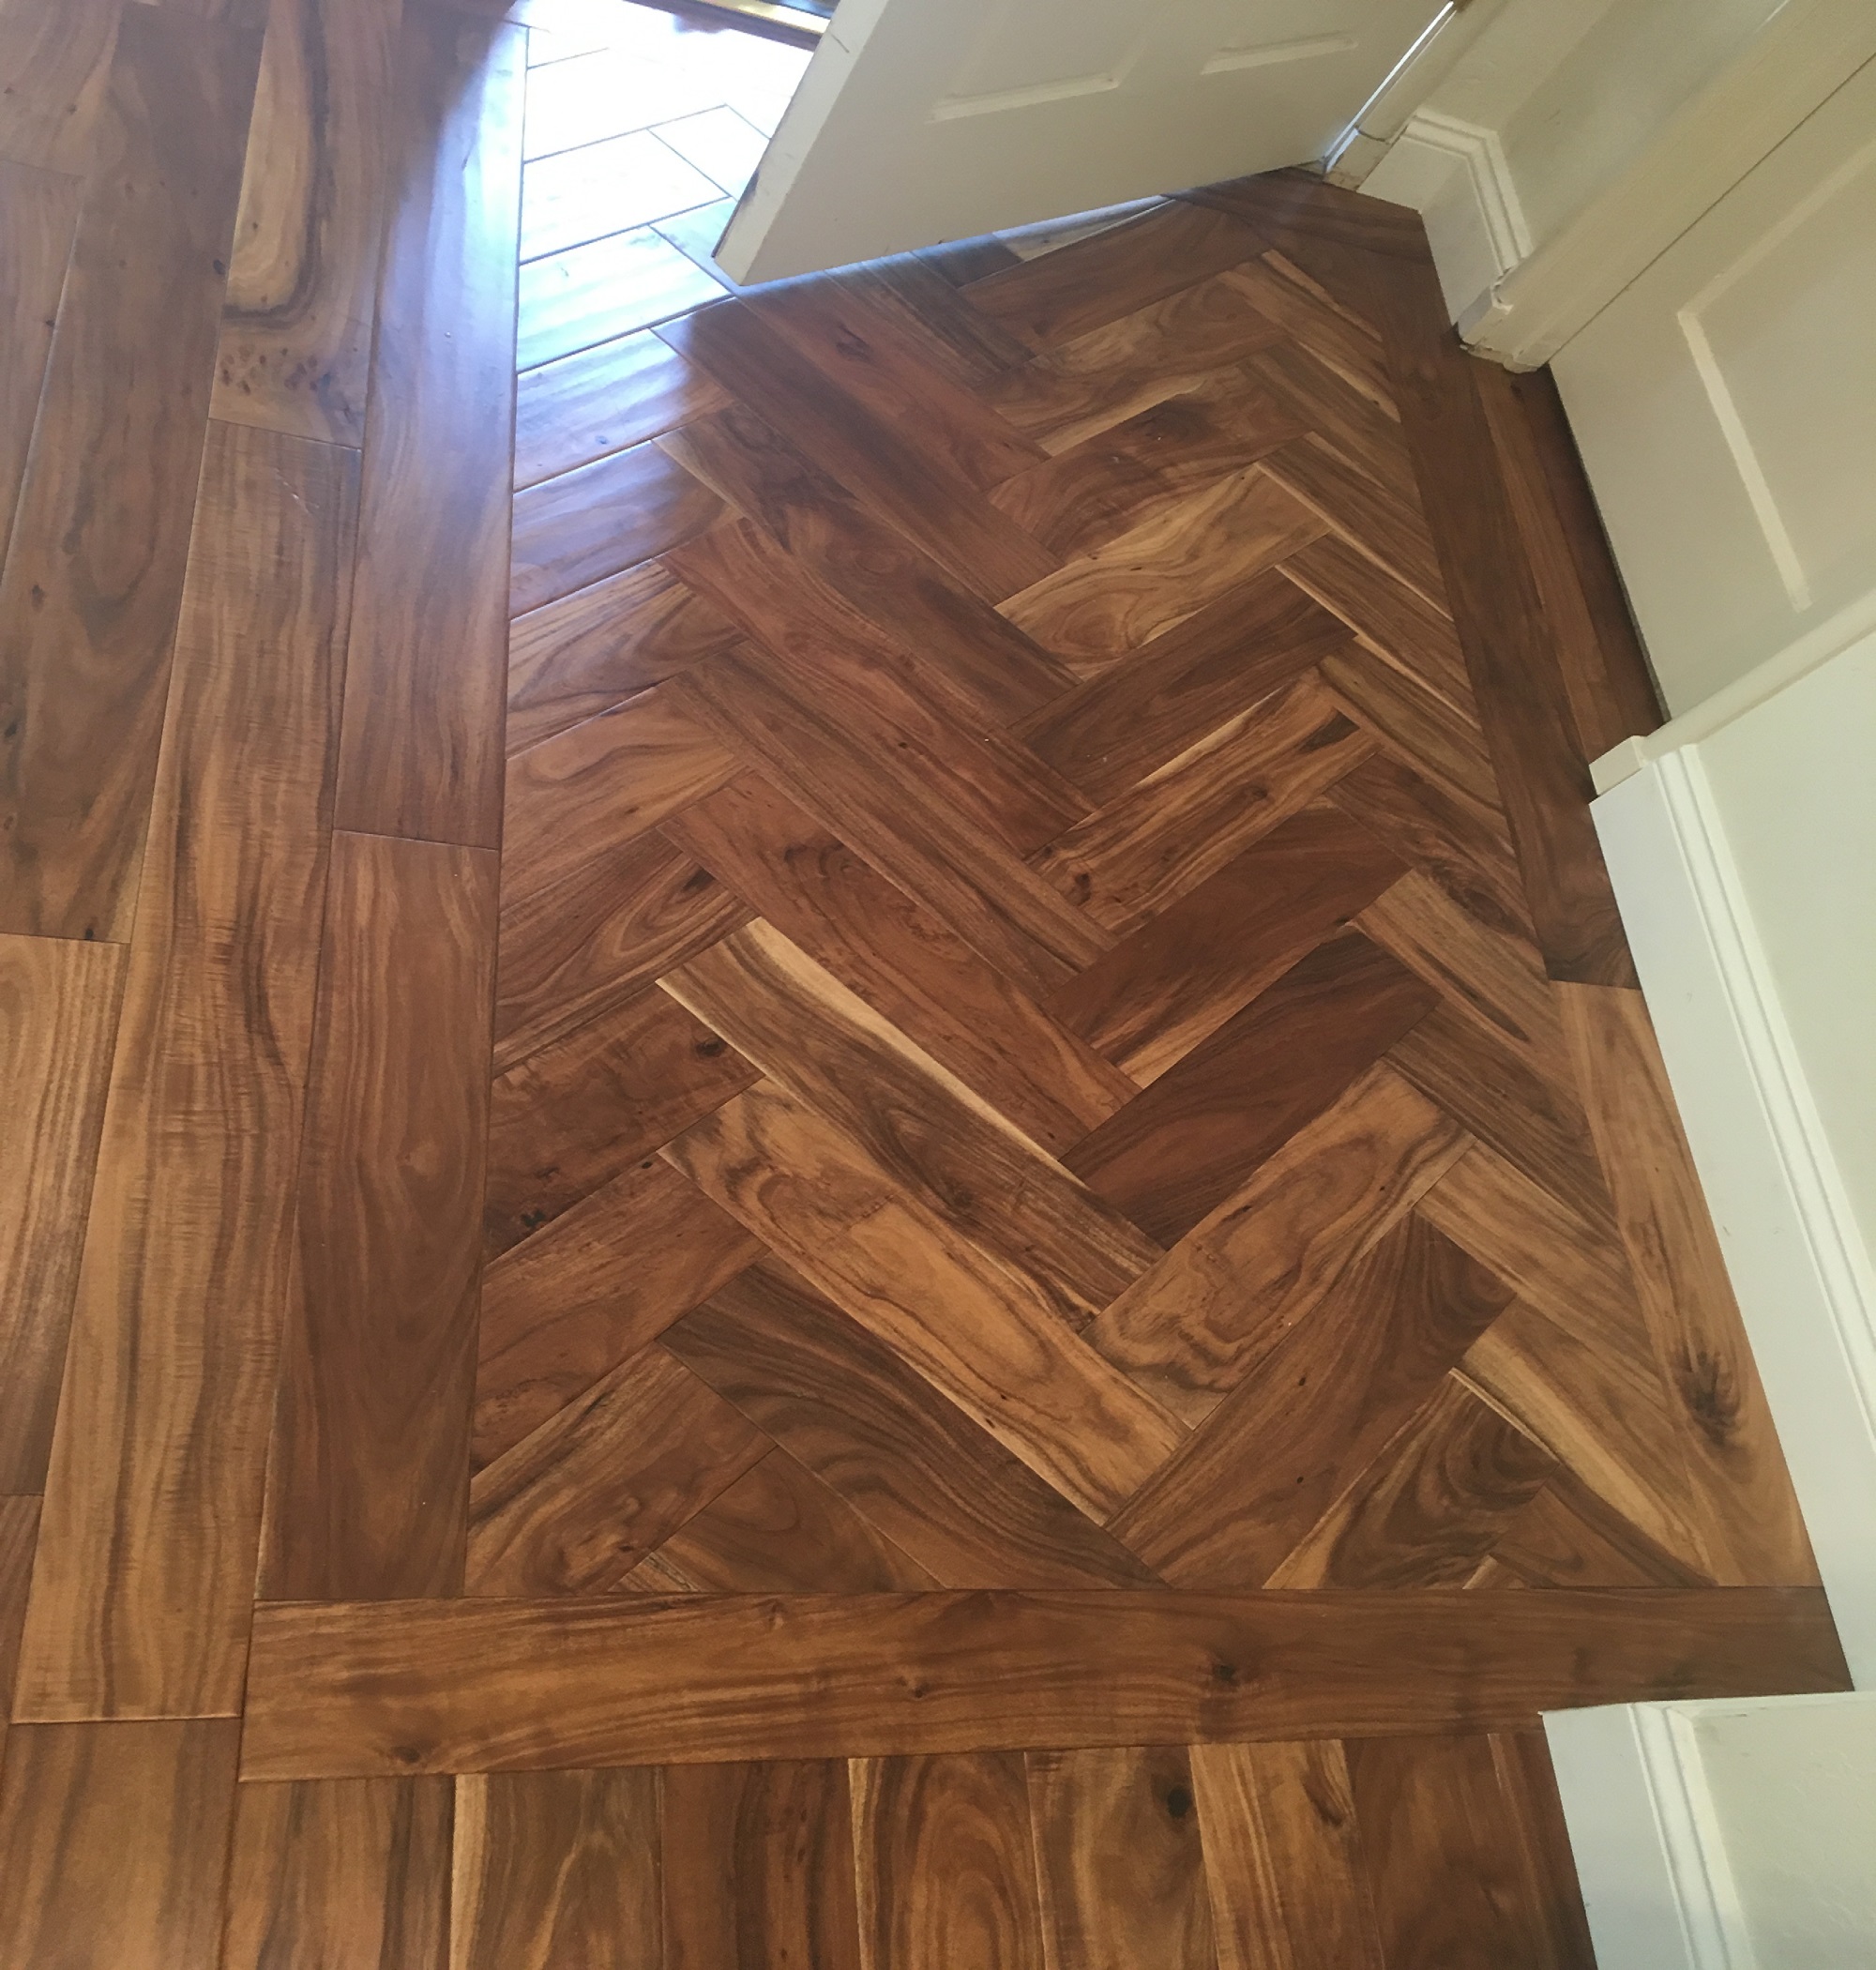 Home Improvements - Hardwood Flooring Decorative Designs and Borders -  HubPages